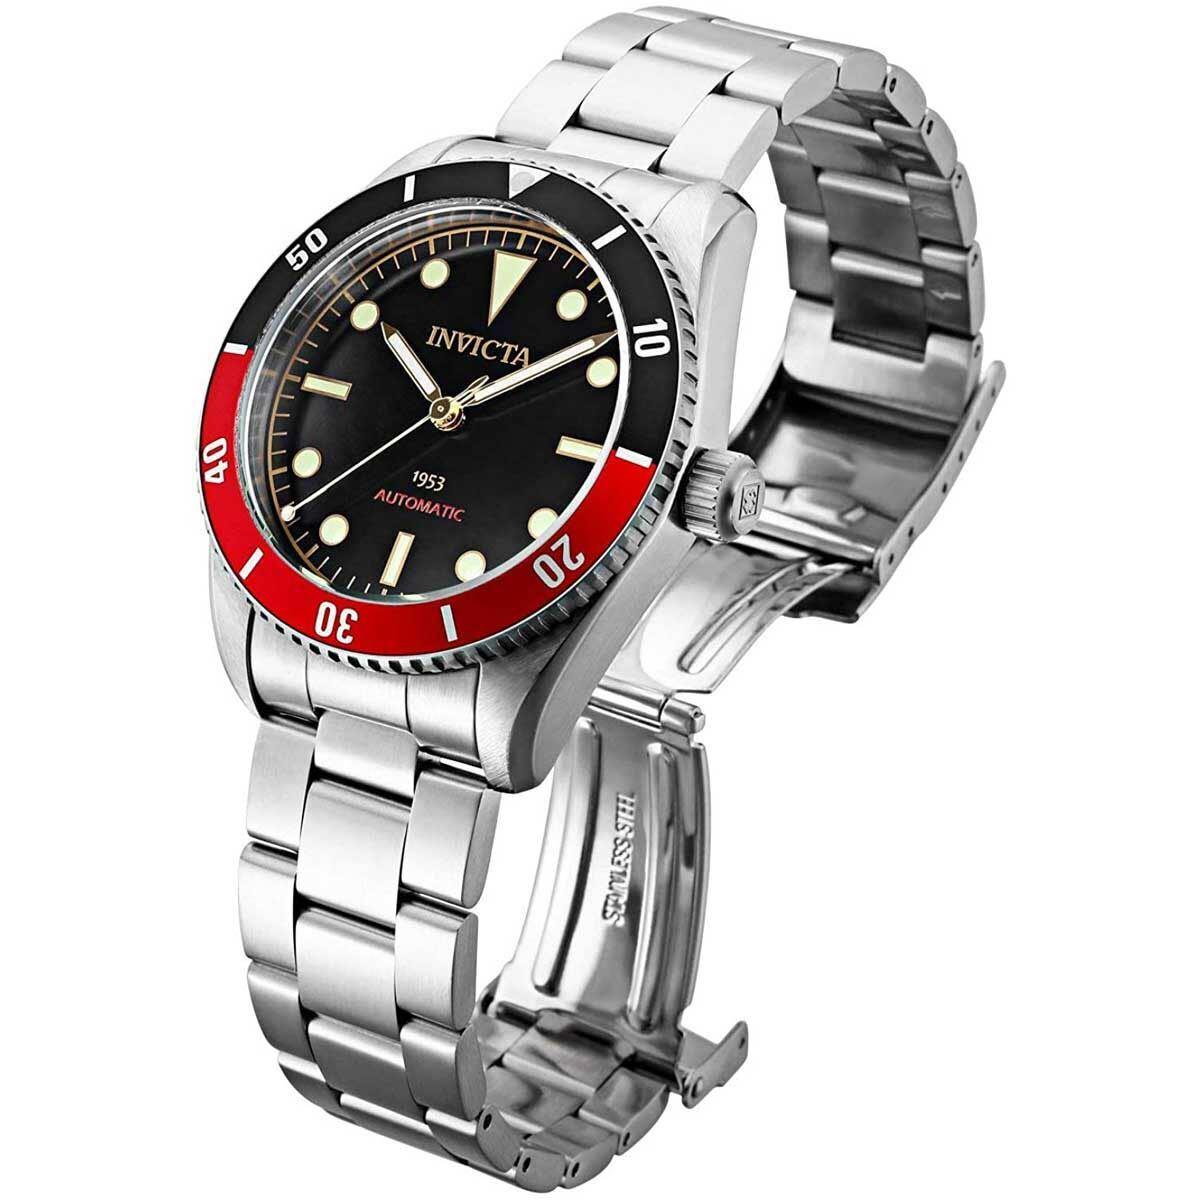 Invicta Men`s Watch Pro Diver Stainless Steel Case Black Dial Bracelet 34334 - Dial: Black, Band: Silver